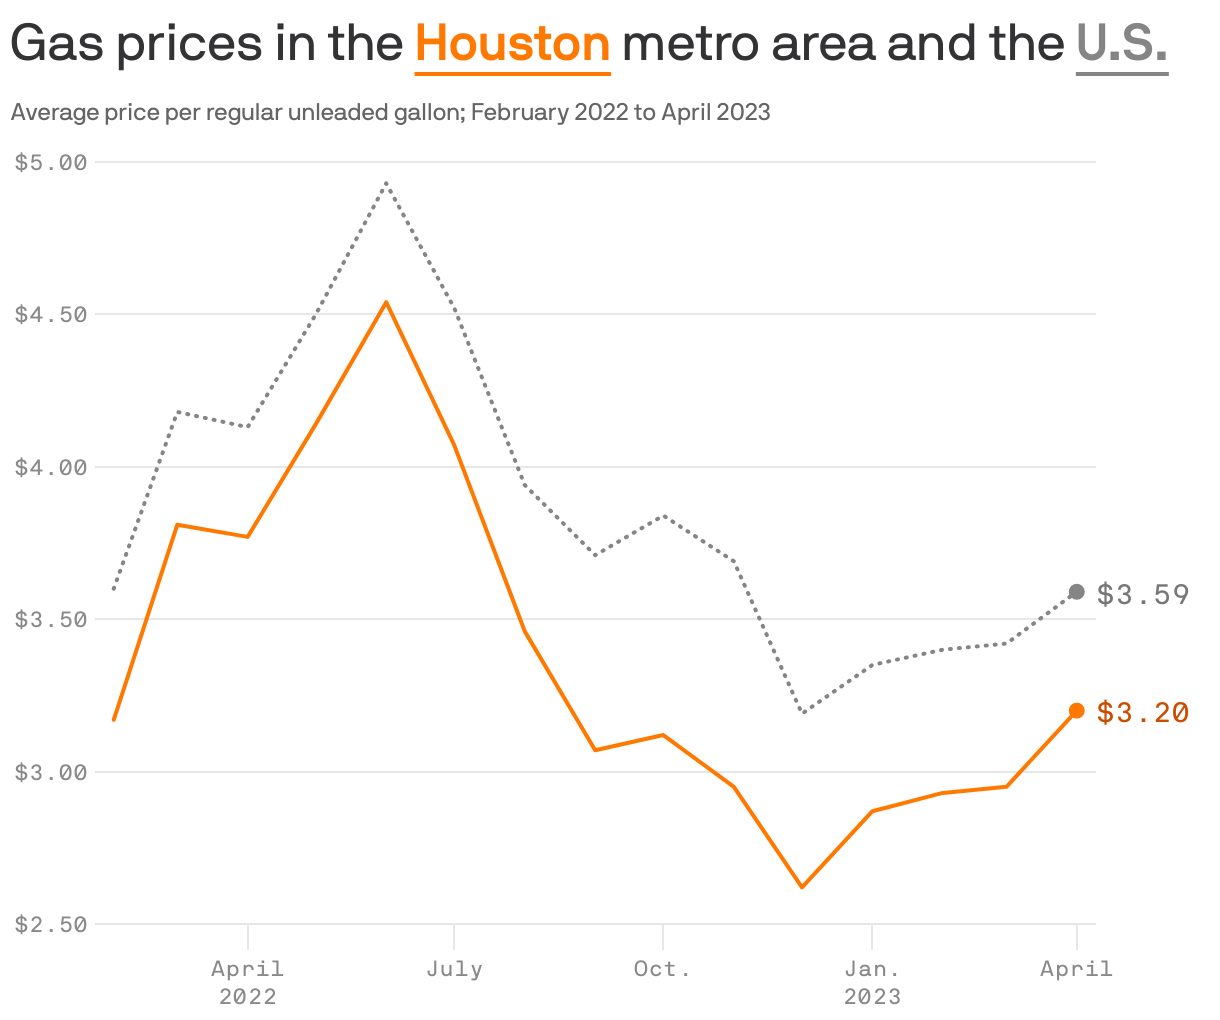 Gas prices in the <b style='text-decoration: underline; text-underline-position: under; color: #ff7900;'>Houston</b> metro area and the <b style='text-decoration: underline; text-underline-position: under; color: #858585;'>U.S.</b>